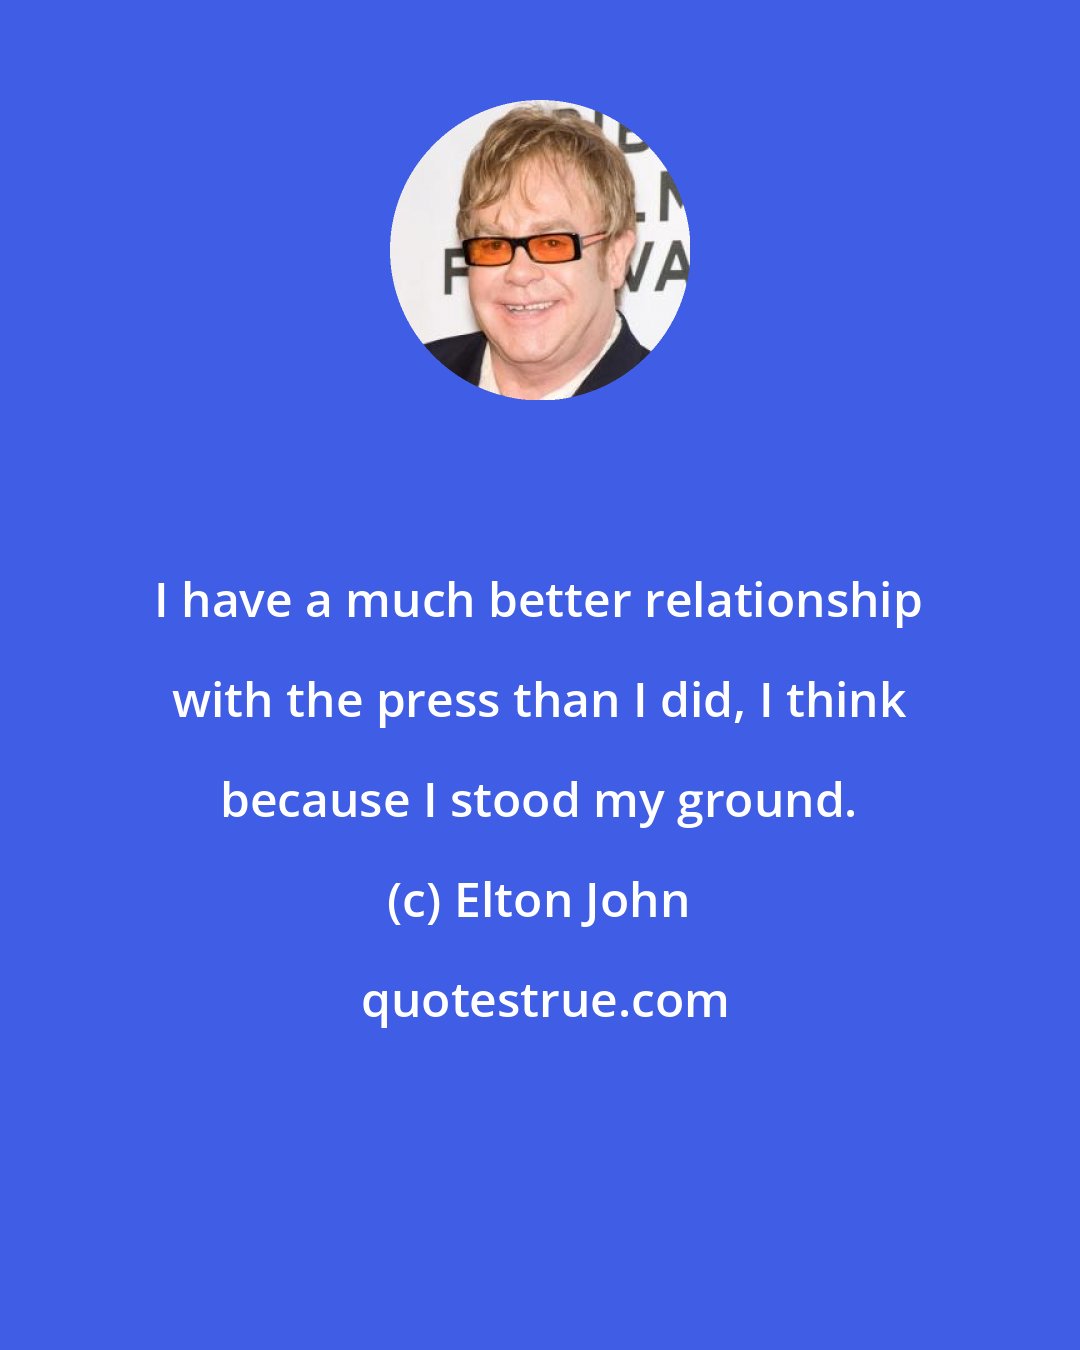 Elton John: I have a much better relationship with the press than I did, I think because I stood my ground.